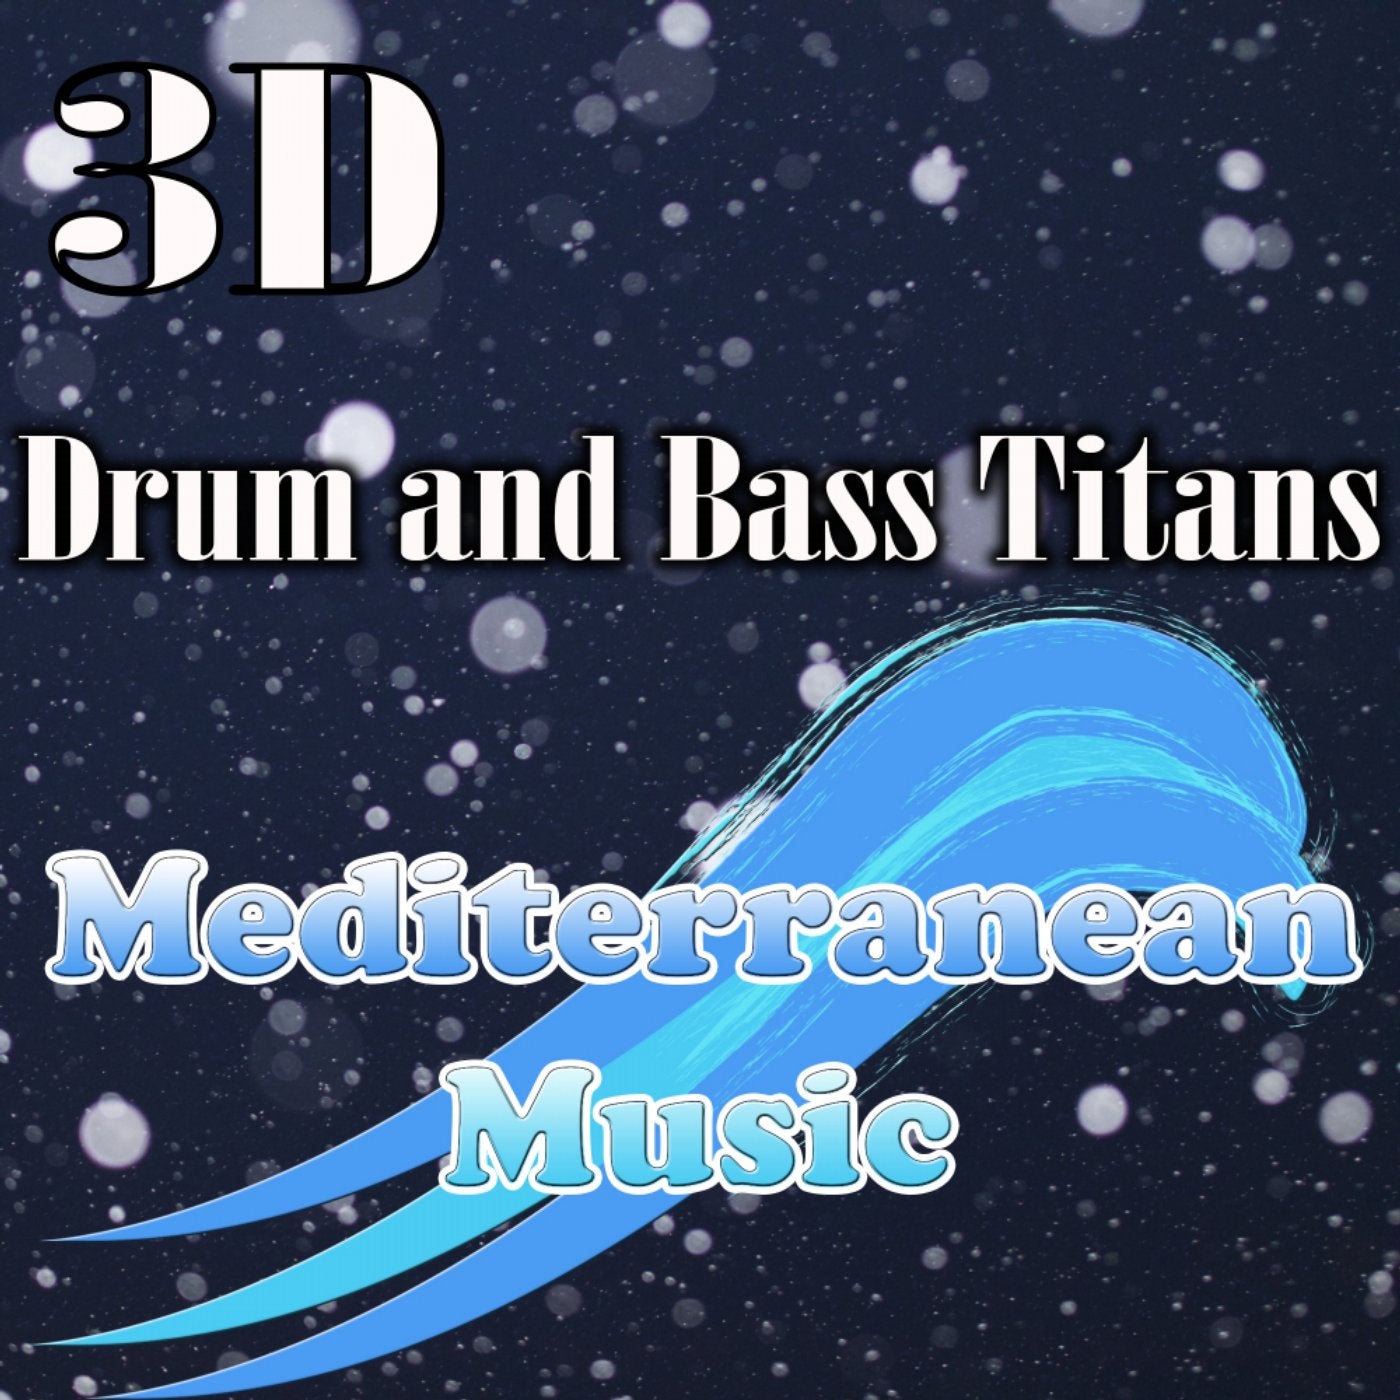 Drum and Bass Titans